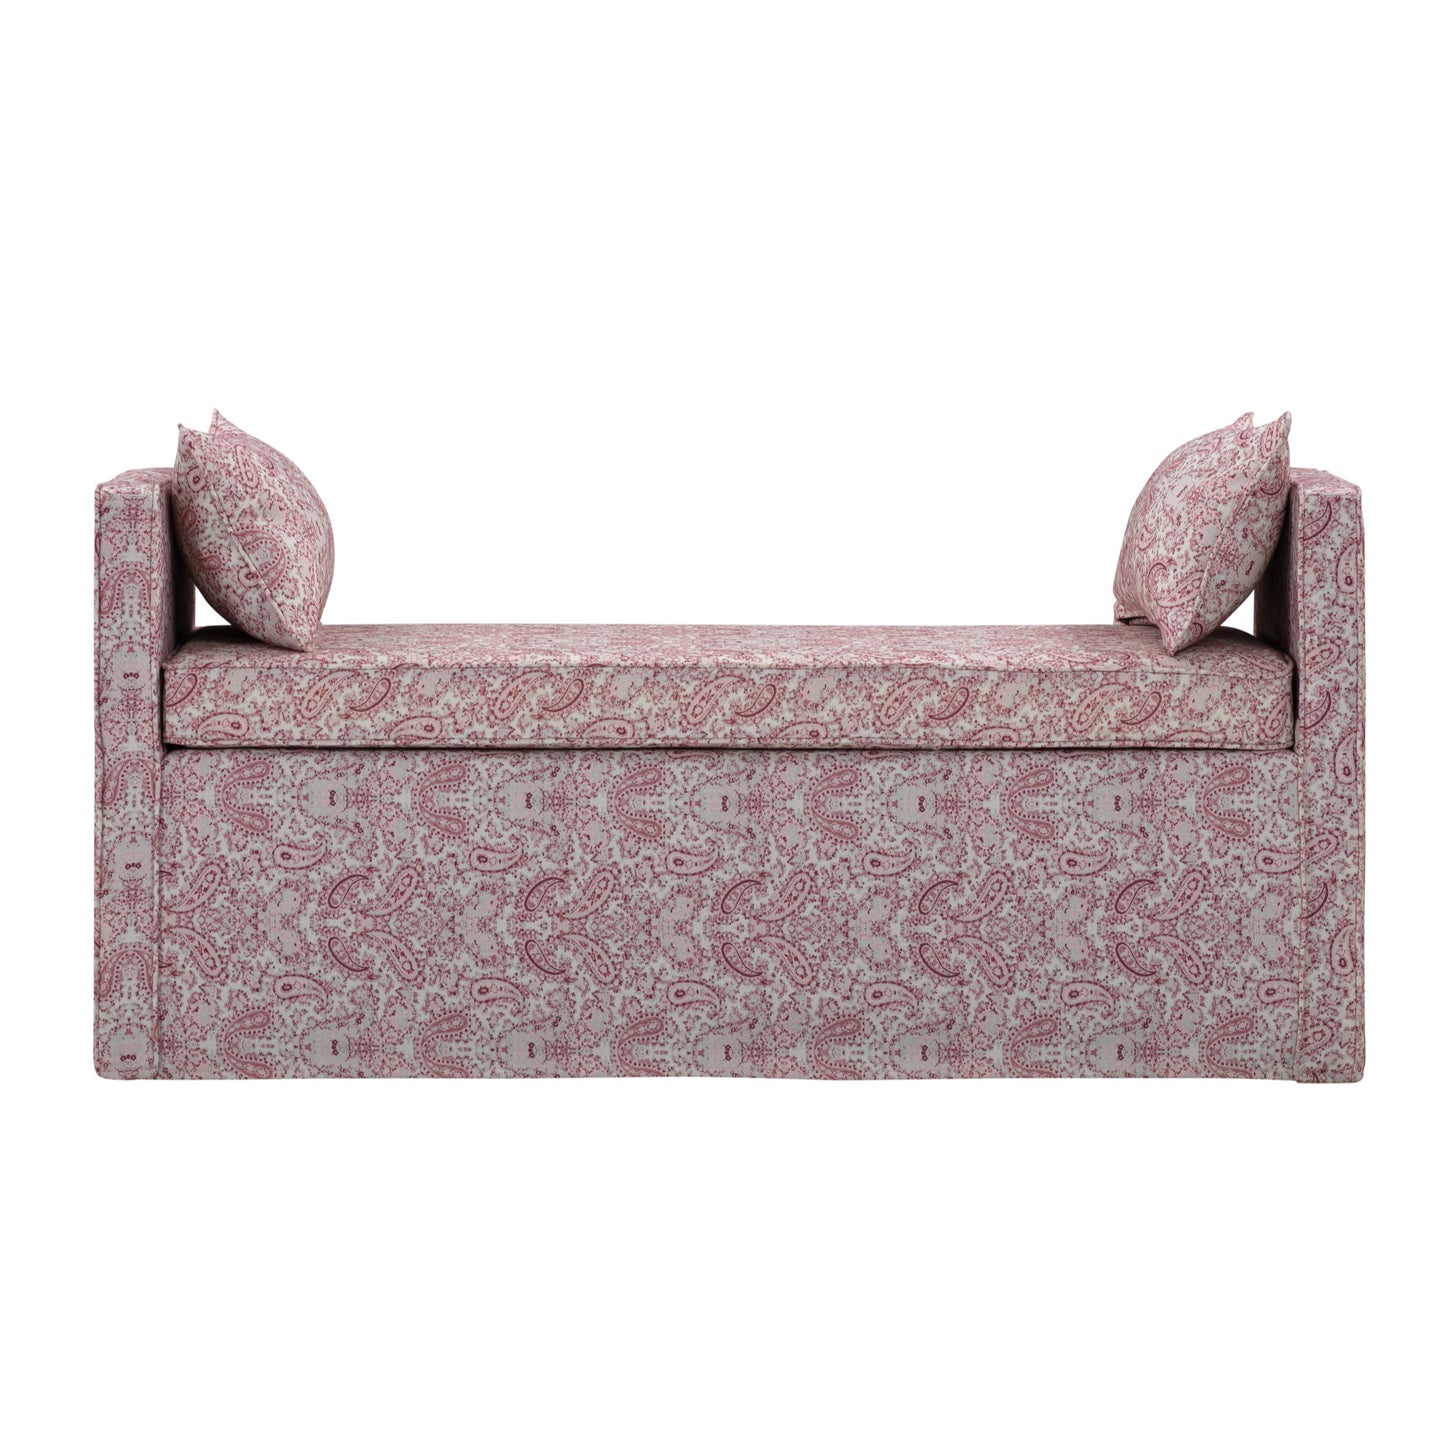 53" Red And Black Upholstered Linen Floral Bench